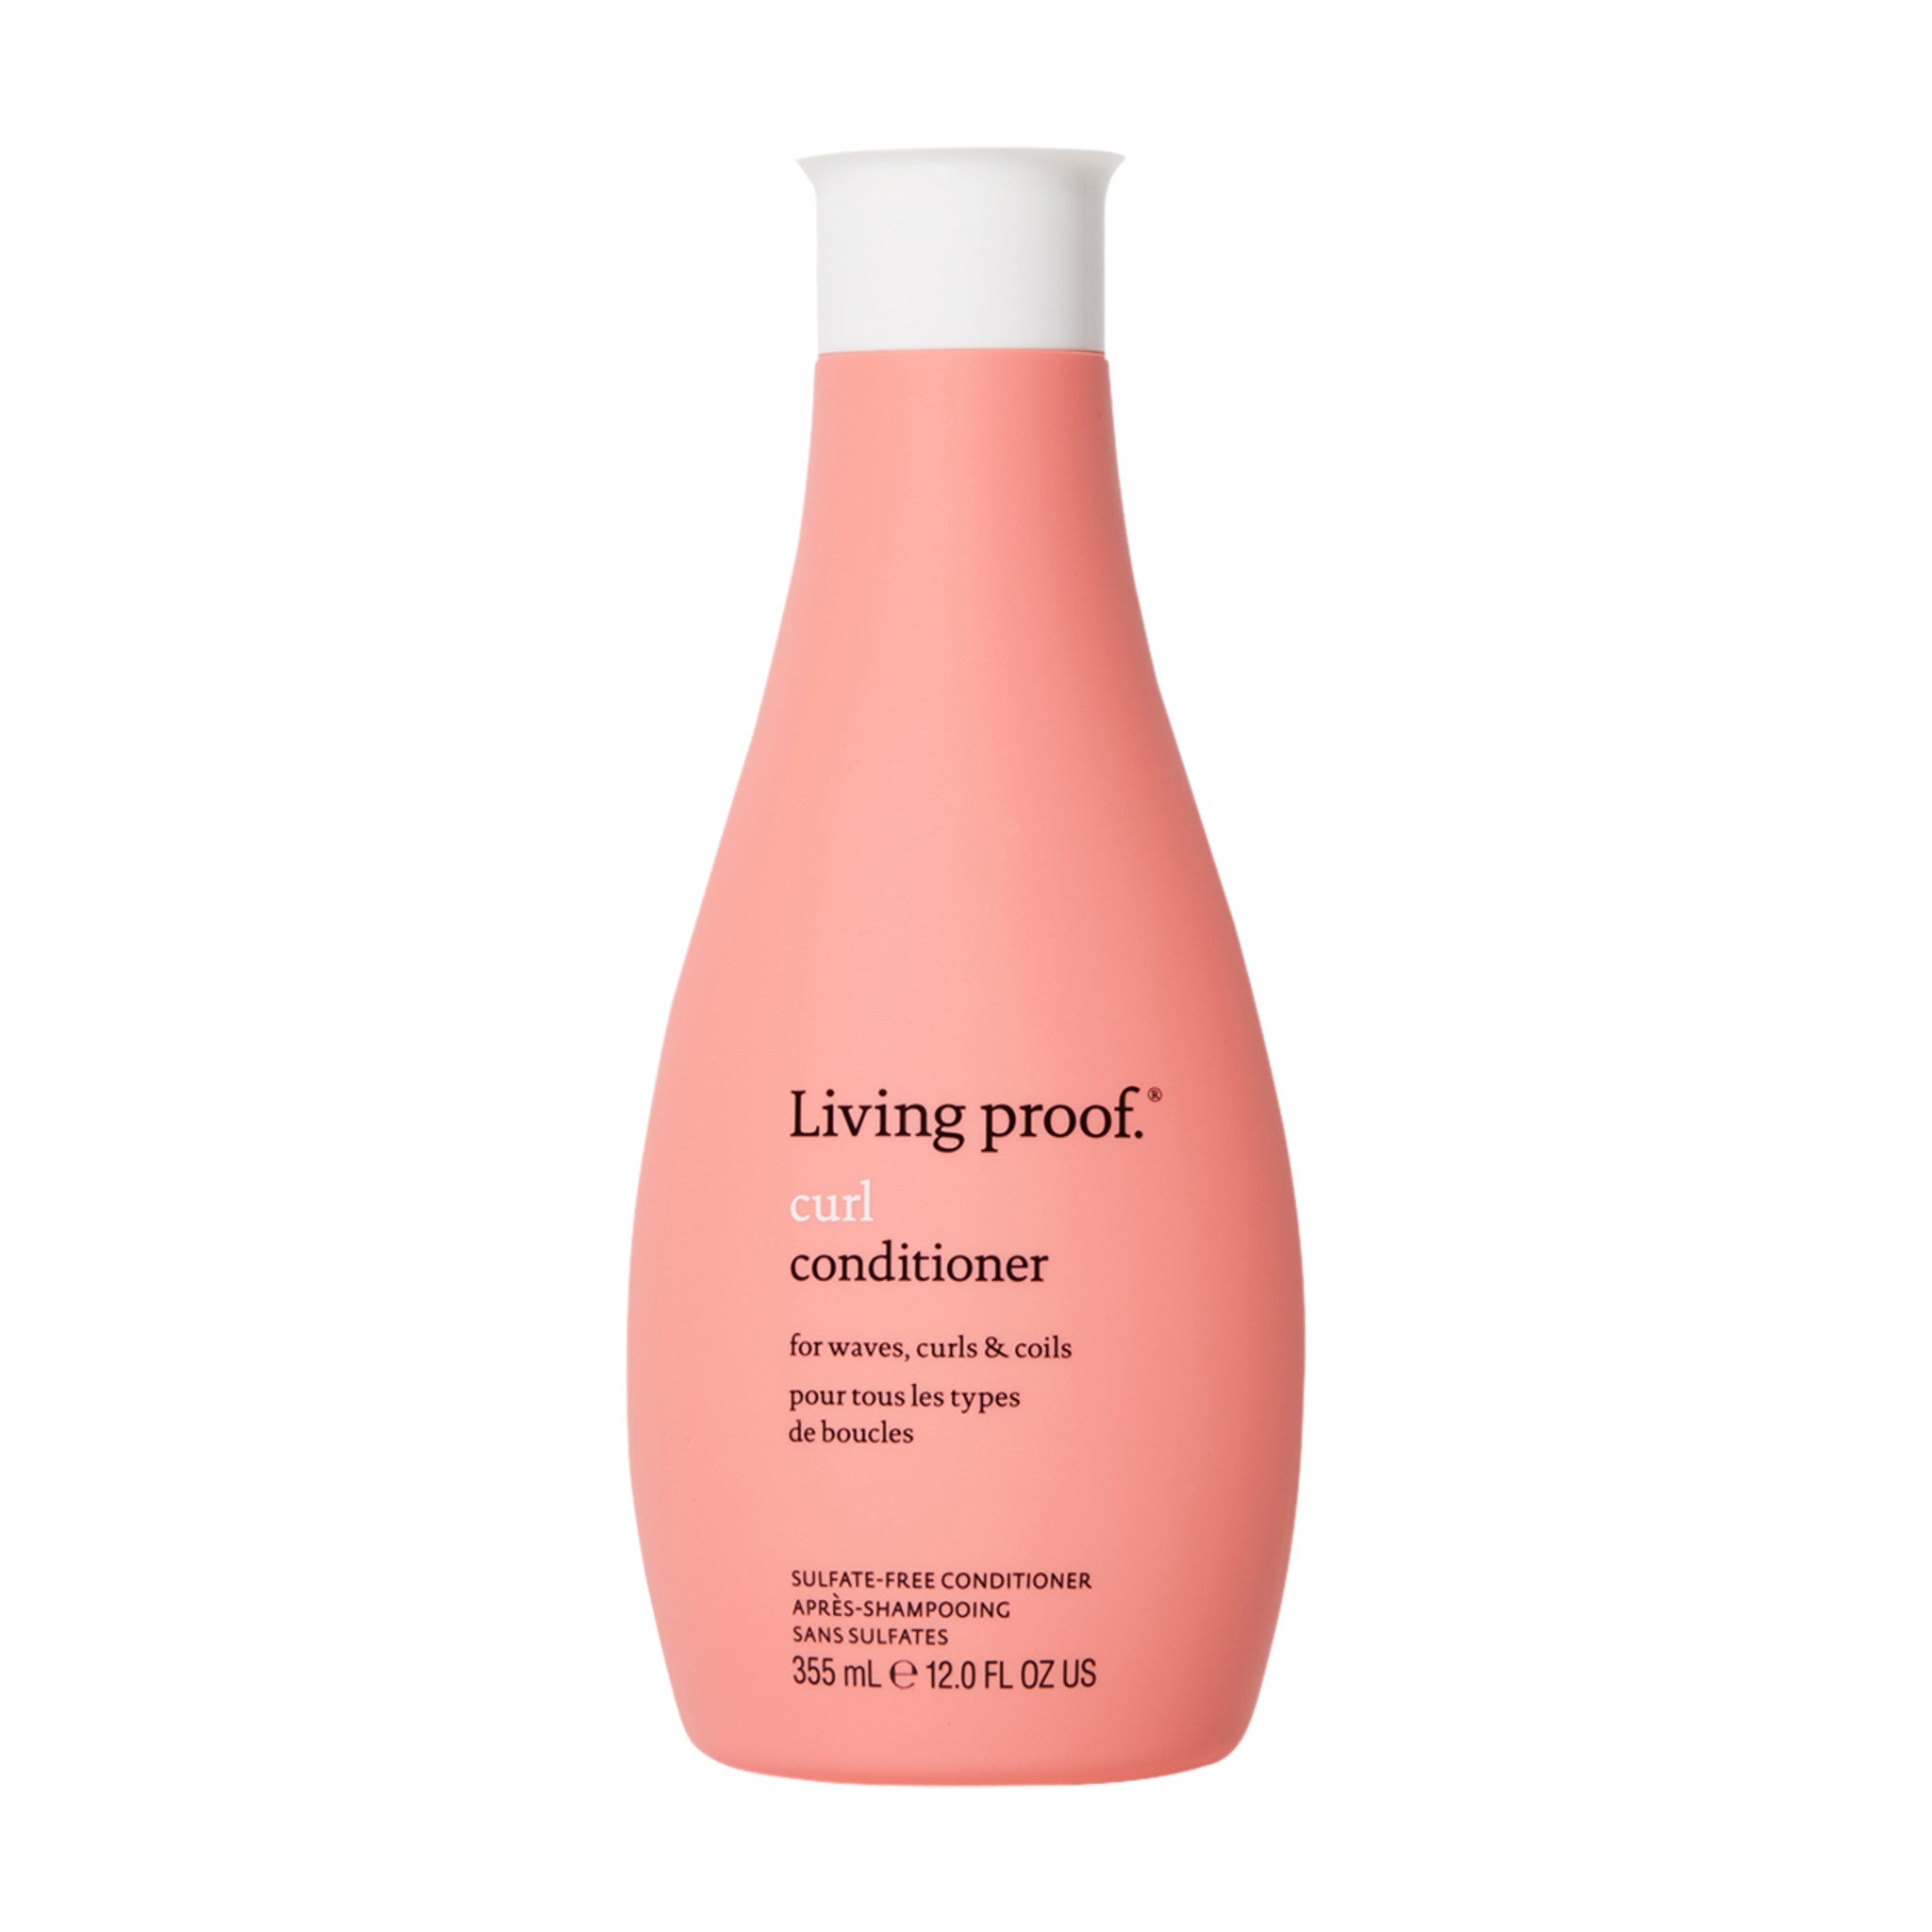 Living Proof Curl Conditioner Size variant: 12 oz main image.